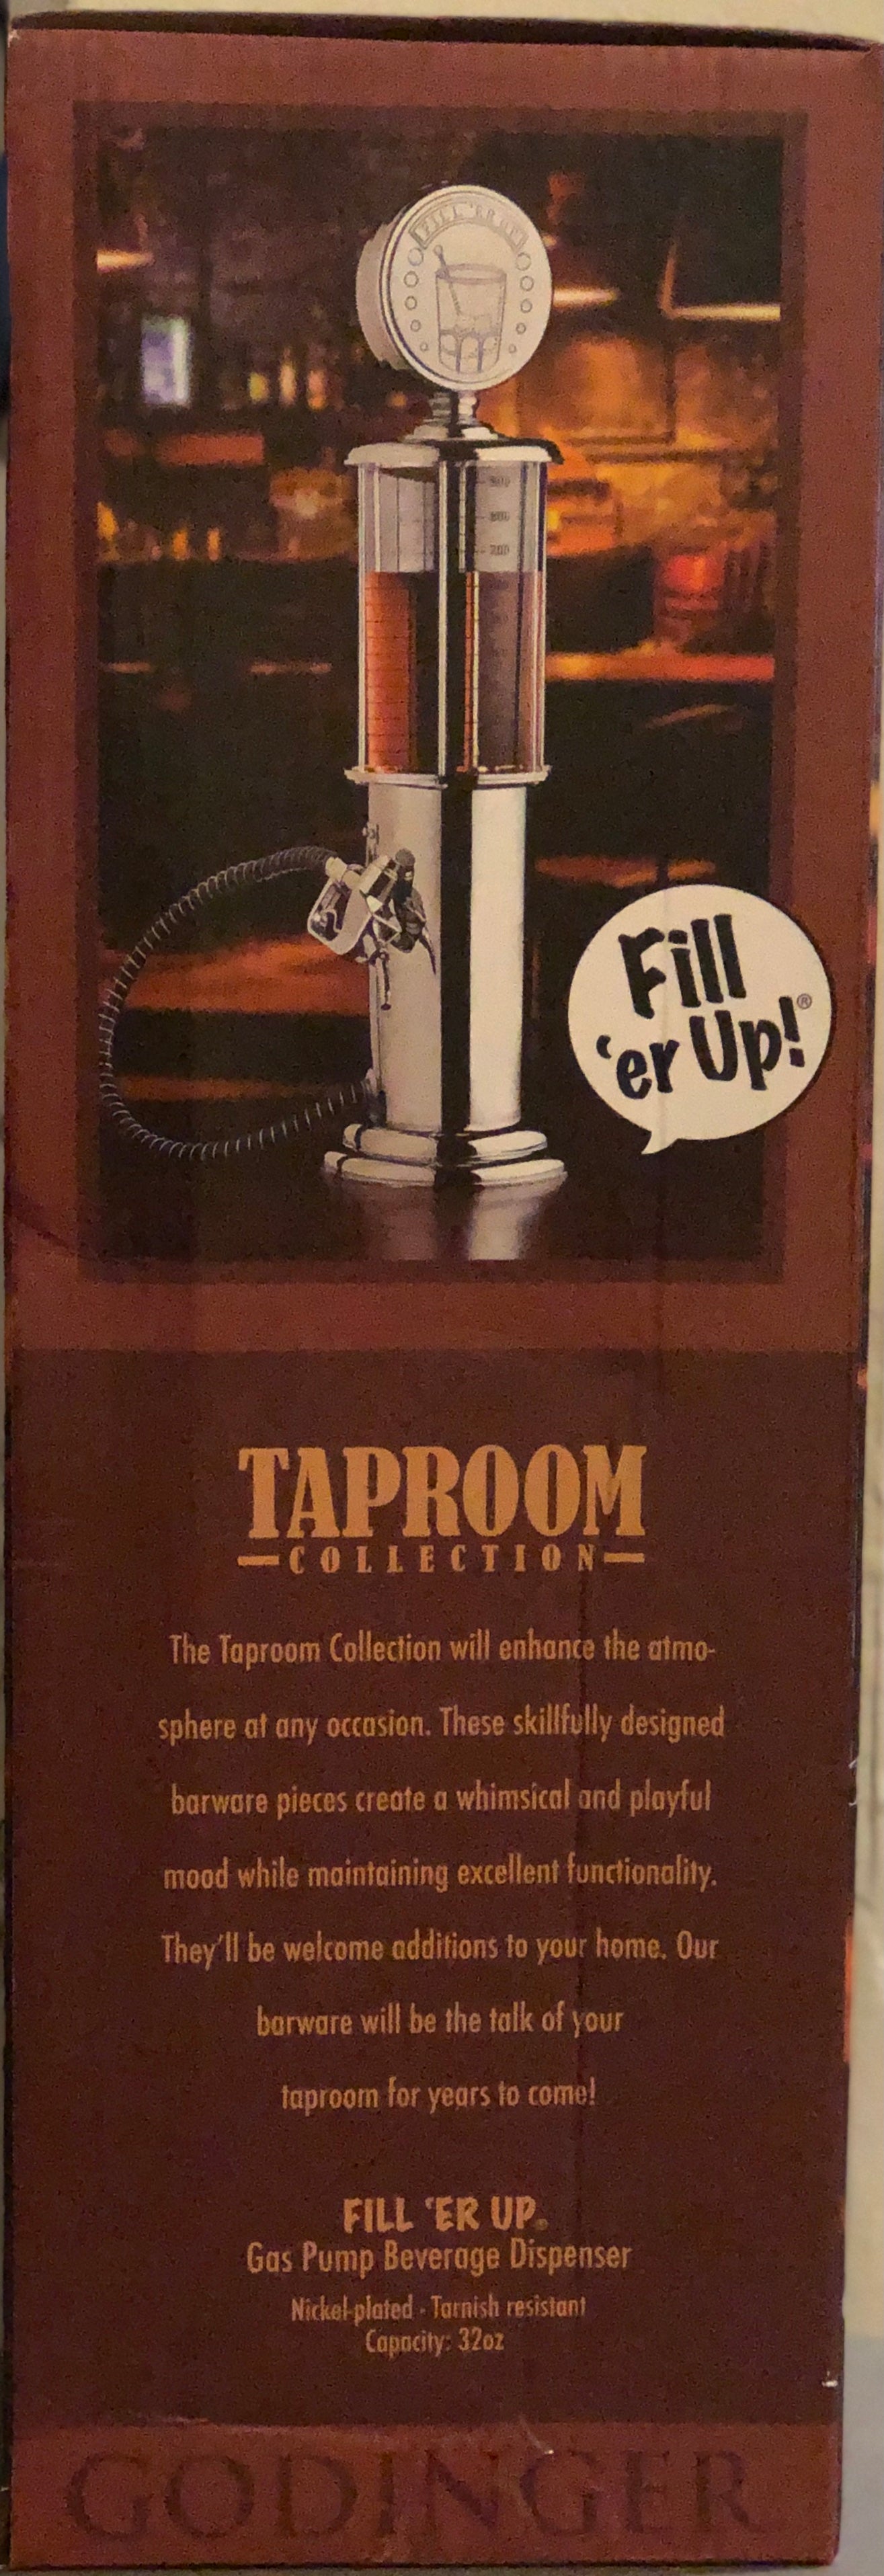 TAPROOM COLLECTION